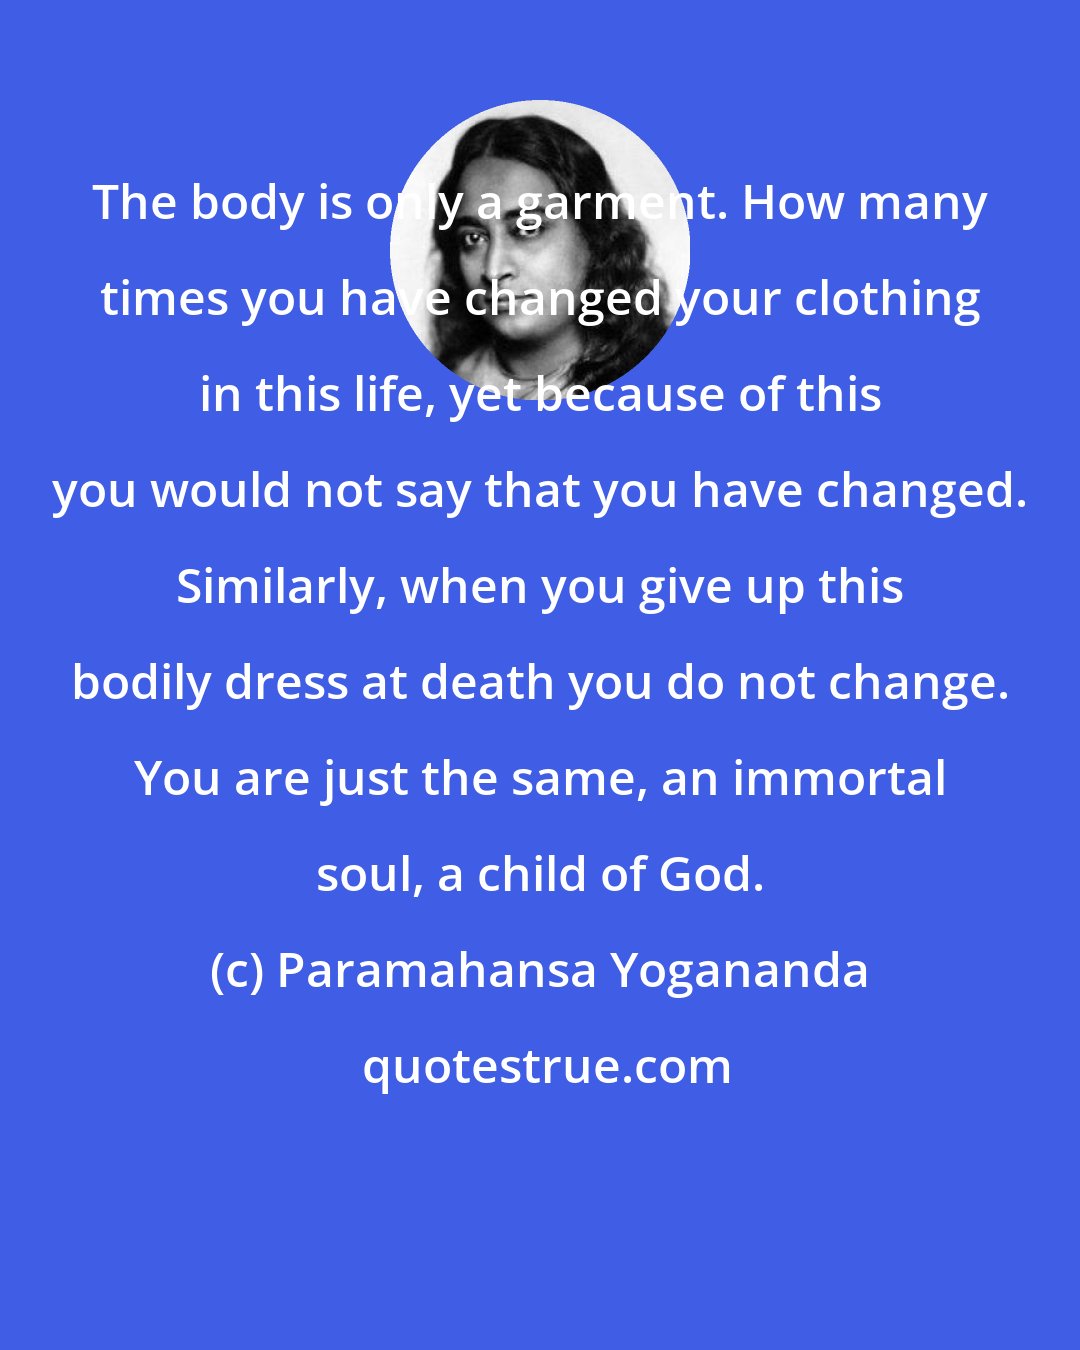 Paramahansa Yogananda: The body is only a garment. How many times you have changed your clothing in this life, yet because of this you would not say that you have changed. Similarly, when you give up this bodily dress at death you do not change. You are just the same, an immortal soul, a child of God.